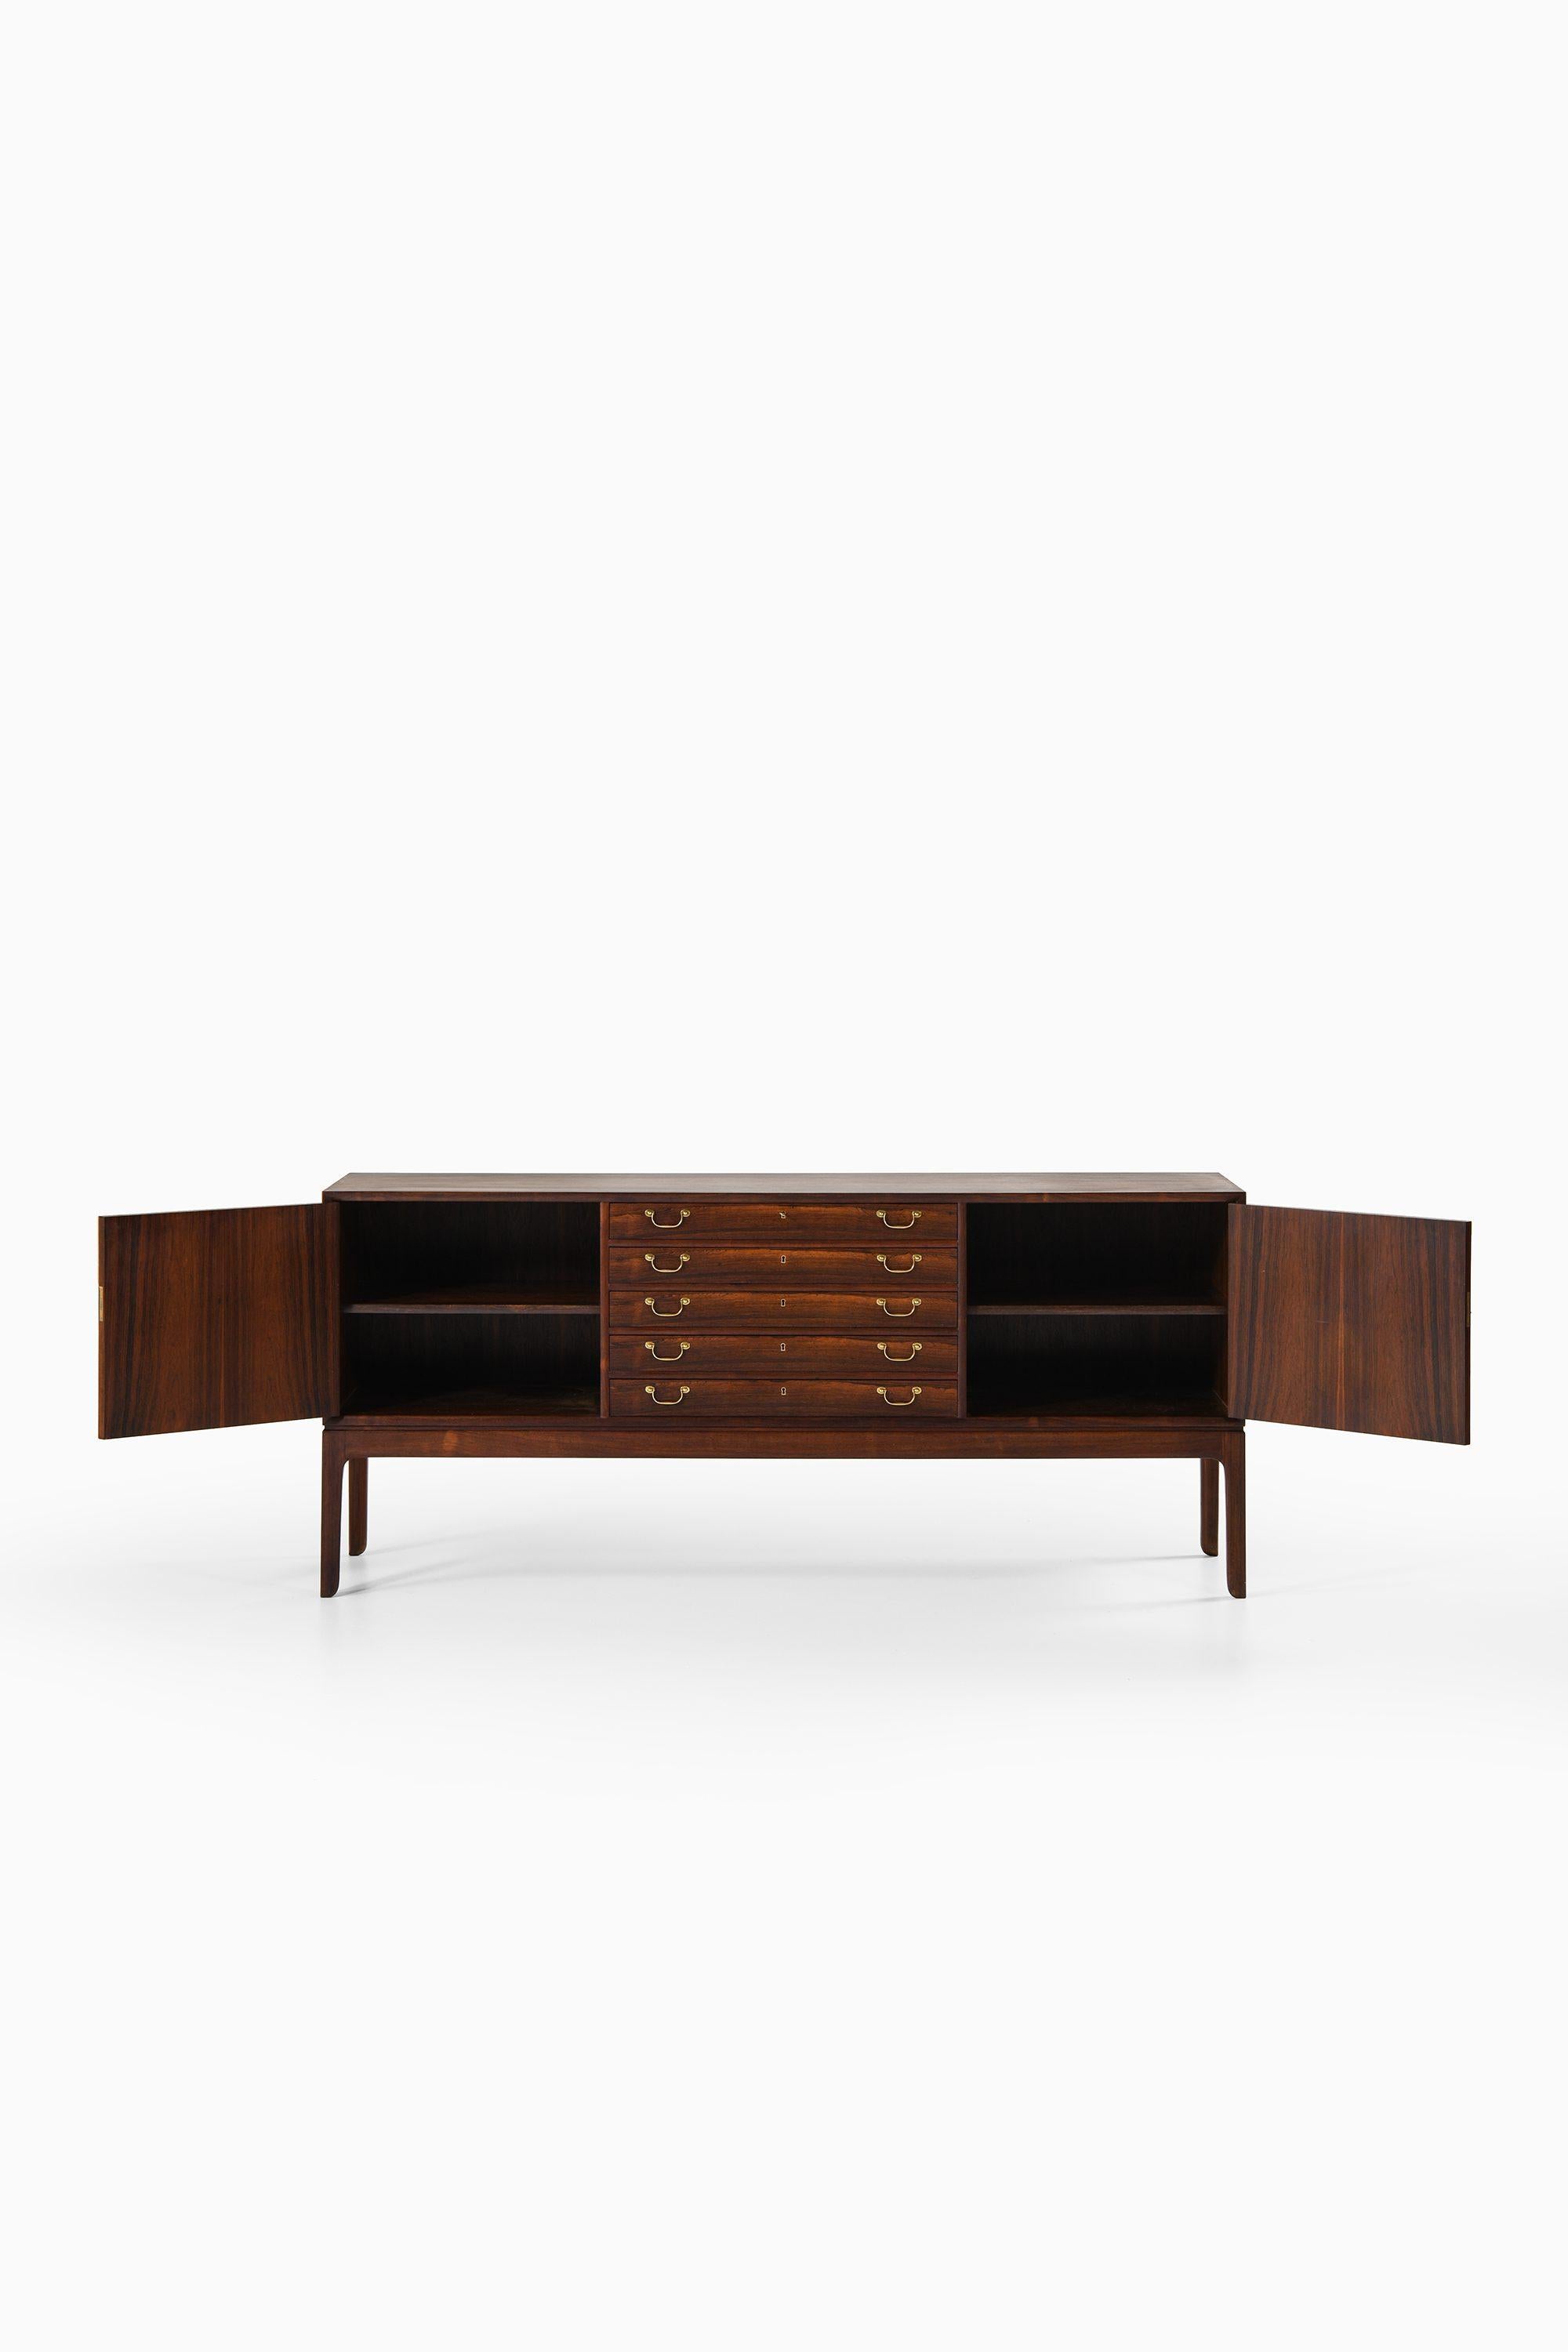 Scandinavian Modern Sideboard in Rosewood and brass by Ole Wanscher For Sale